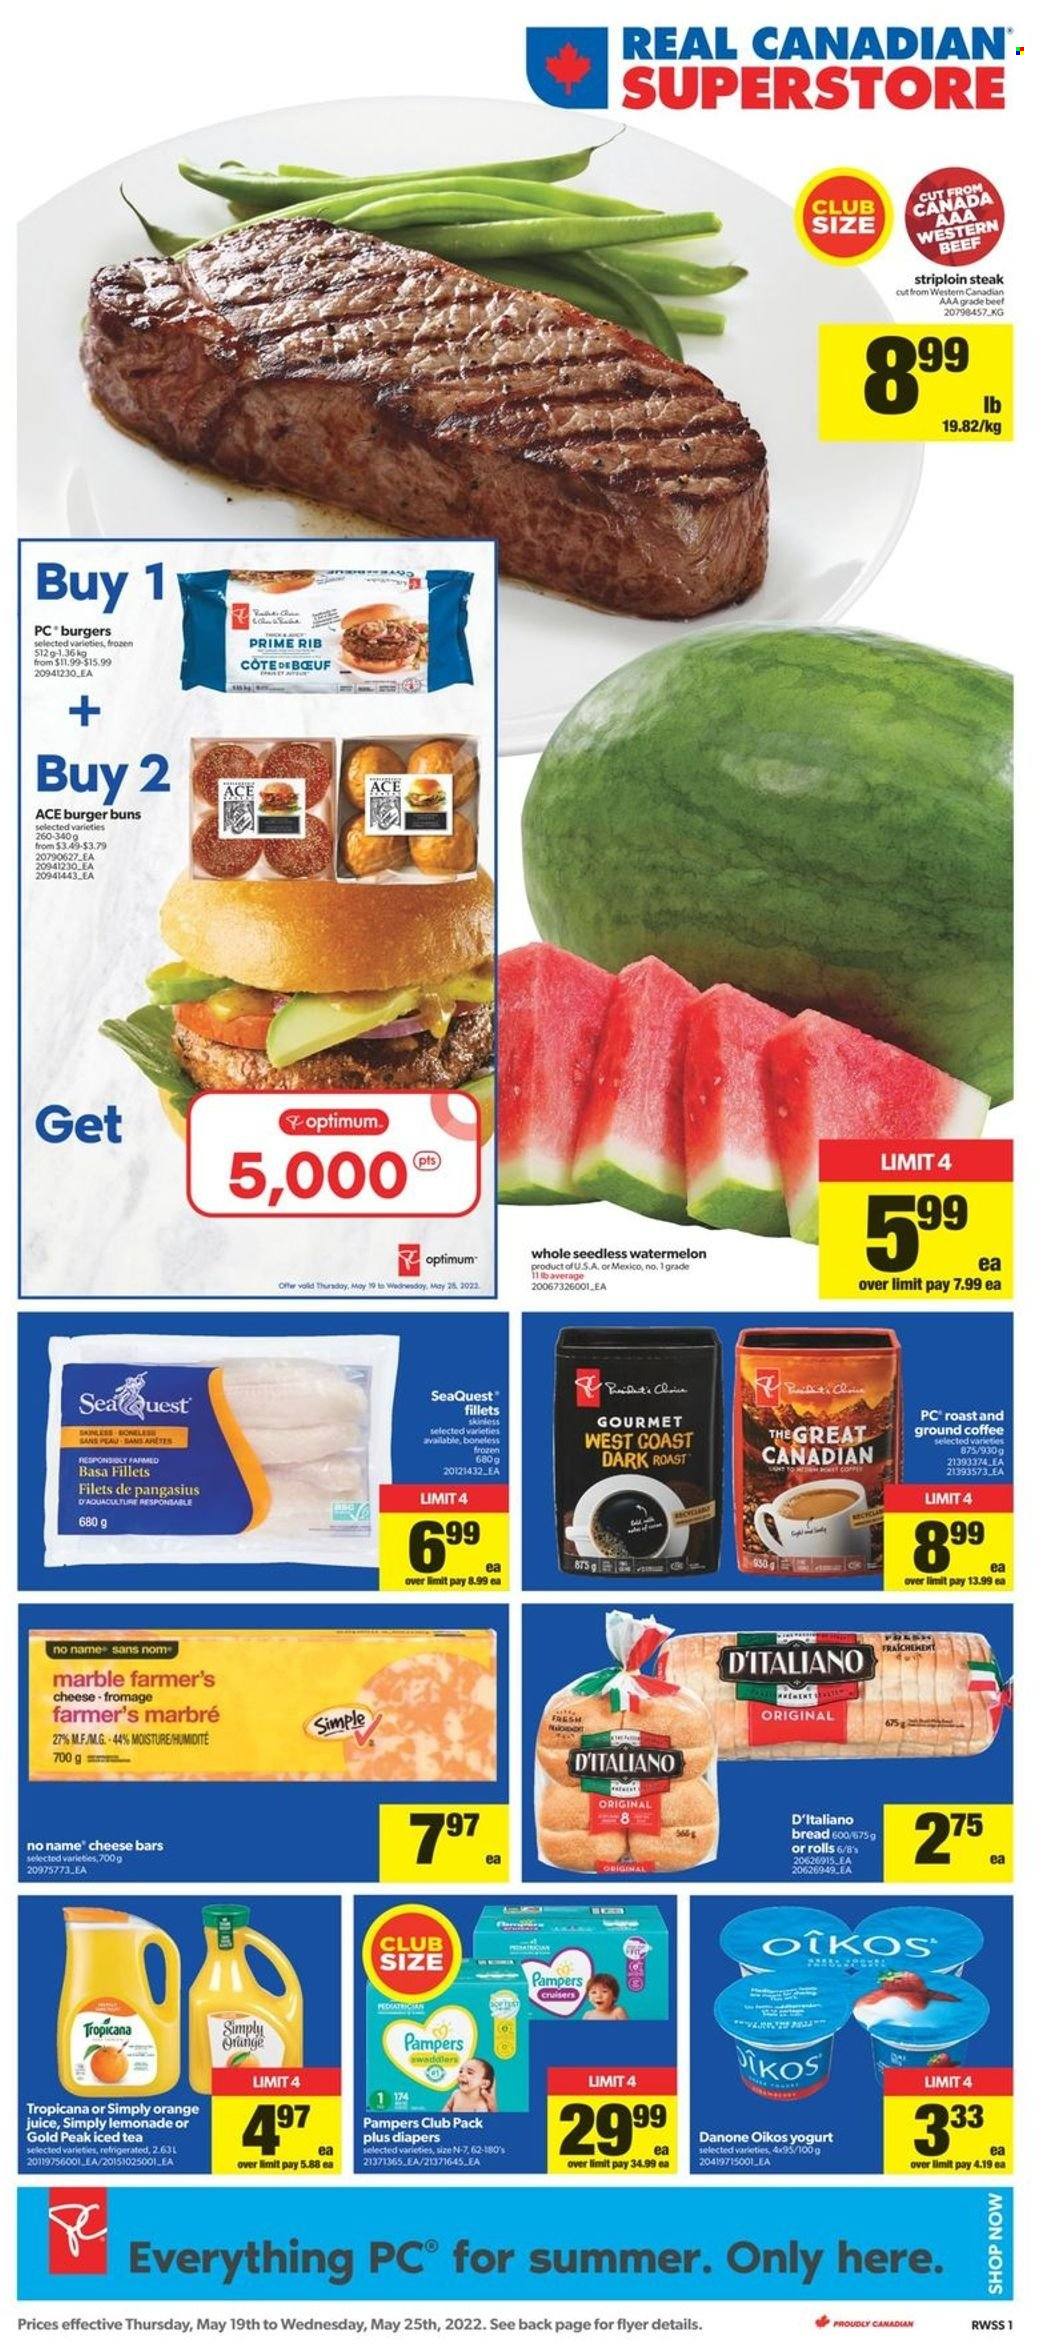 thumbnail - Real Canadian Superstore Flyer - May 19, 2022 - May 25, 2022 - Sales products - bread, buns, burger buns, watermelon, pangasius, No Name, cheese, yoghurt, Oikos, lemonade, juice, ice tea, coffee, ground coffee, beef meat, striploin steak, nappies, Optimum, Pampers, steak, Danone. Page 1.